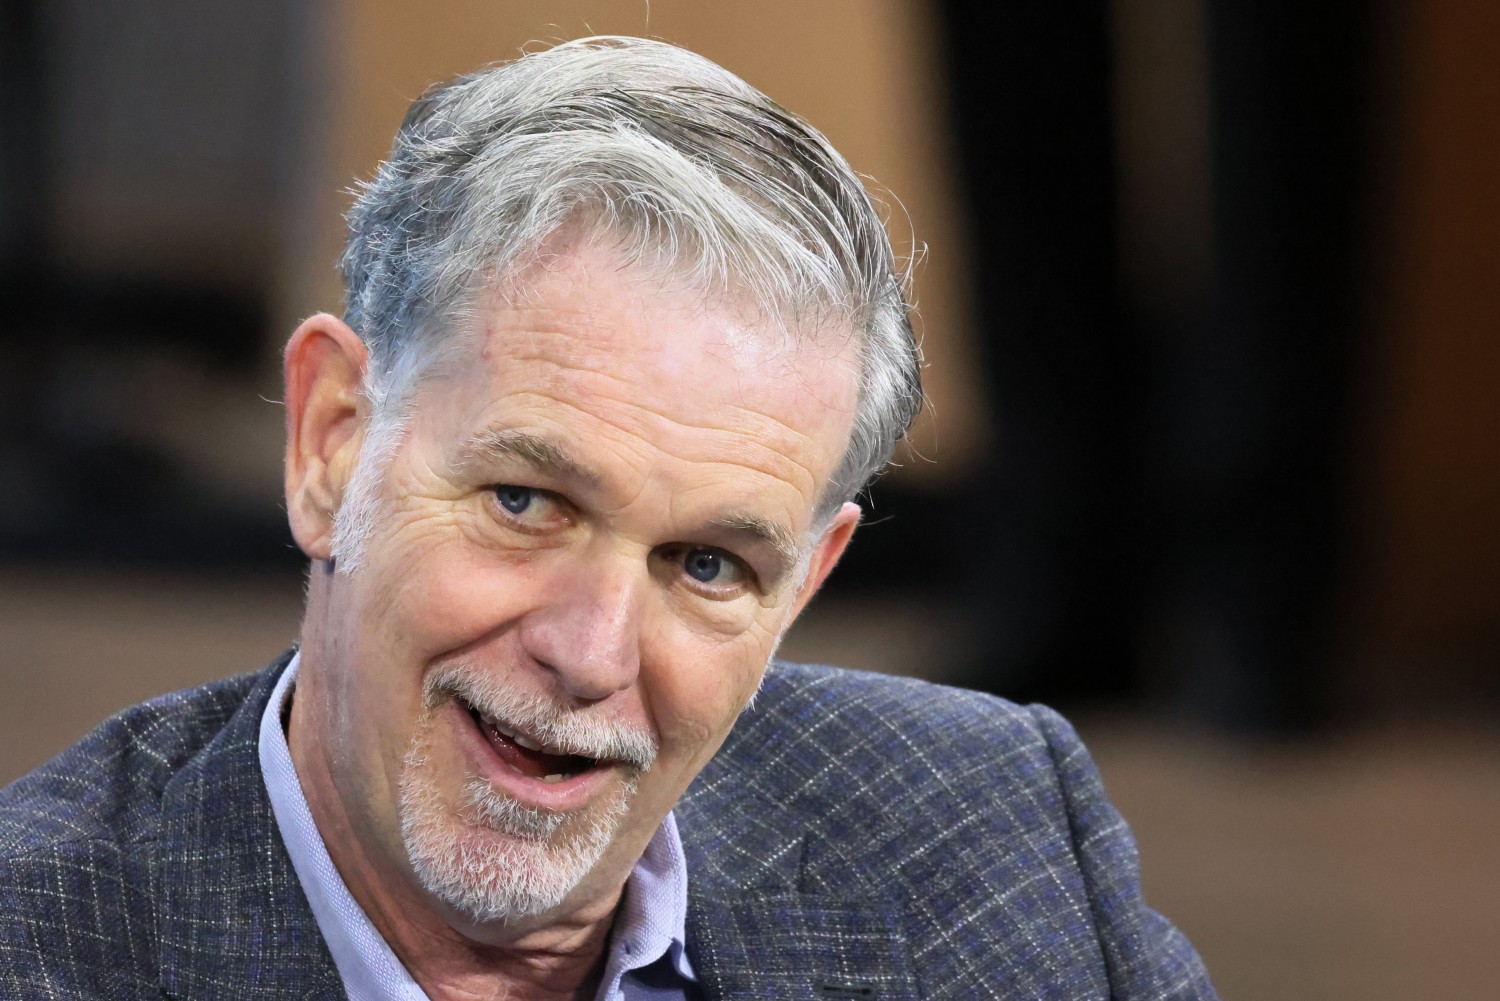 Reed Hastings sells $1.1 billion in Netflix shares